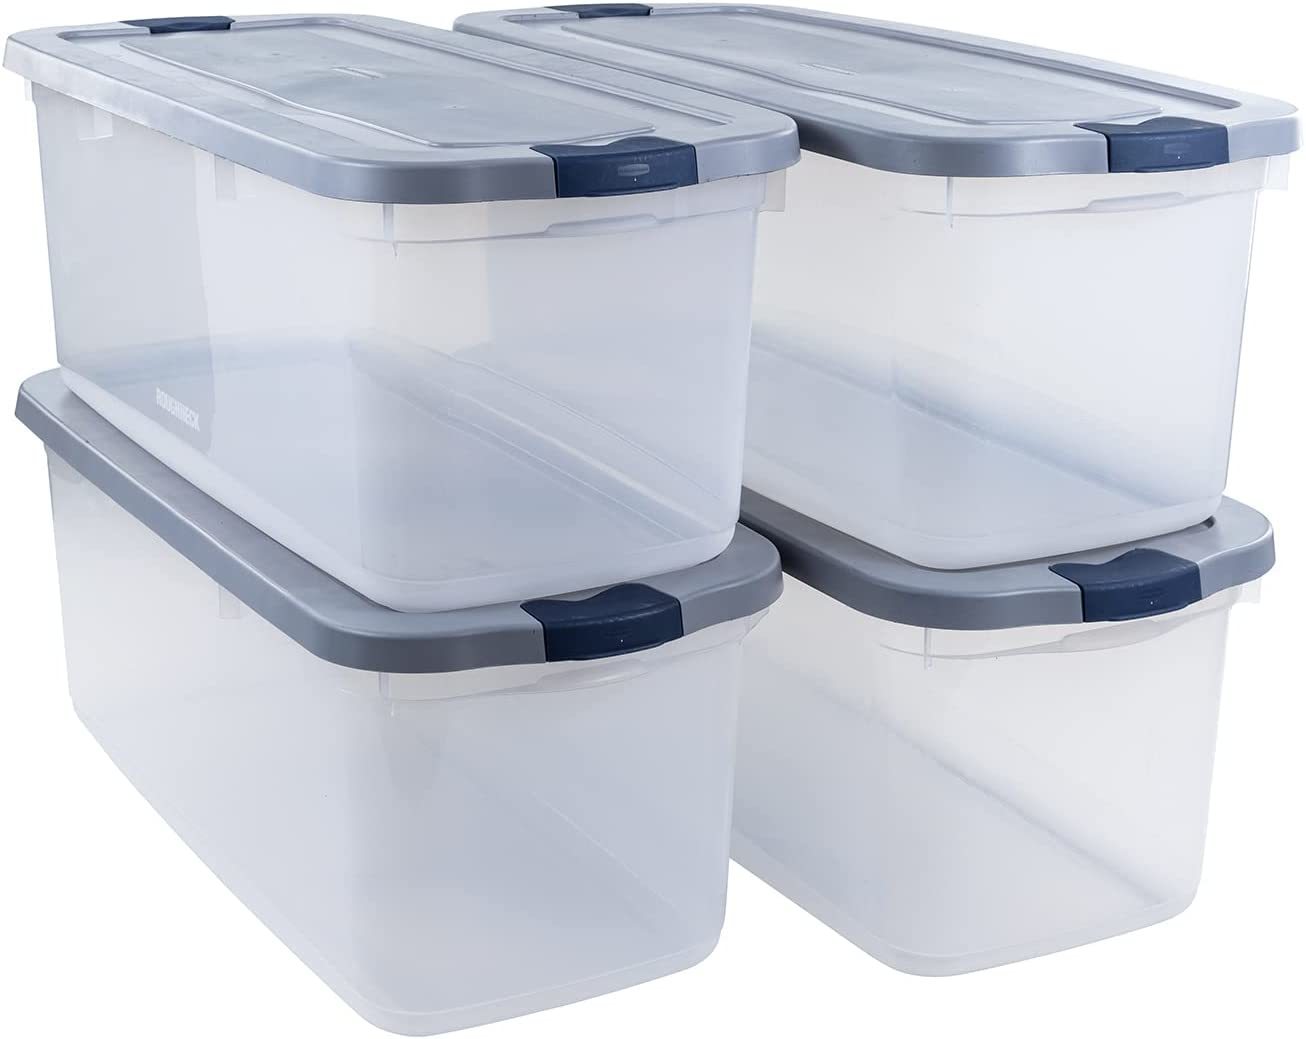 Rubbermaid Roughneck Clear 95 Qt/23.75 Gal Storage Containers, Pack Of 4 With - $176.99